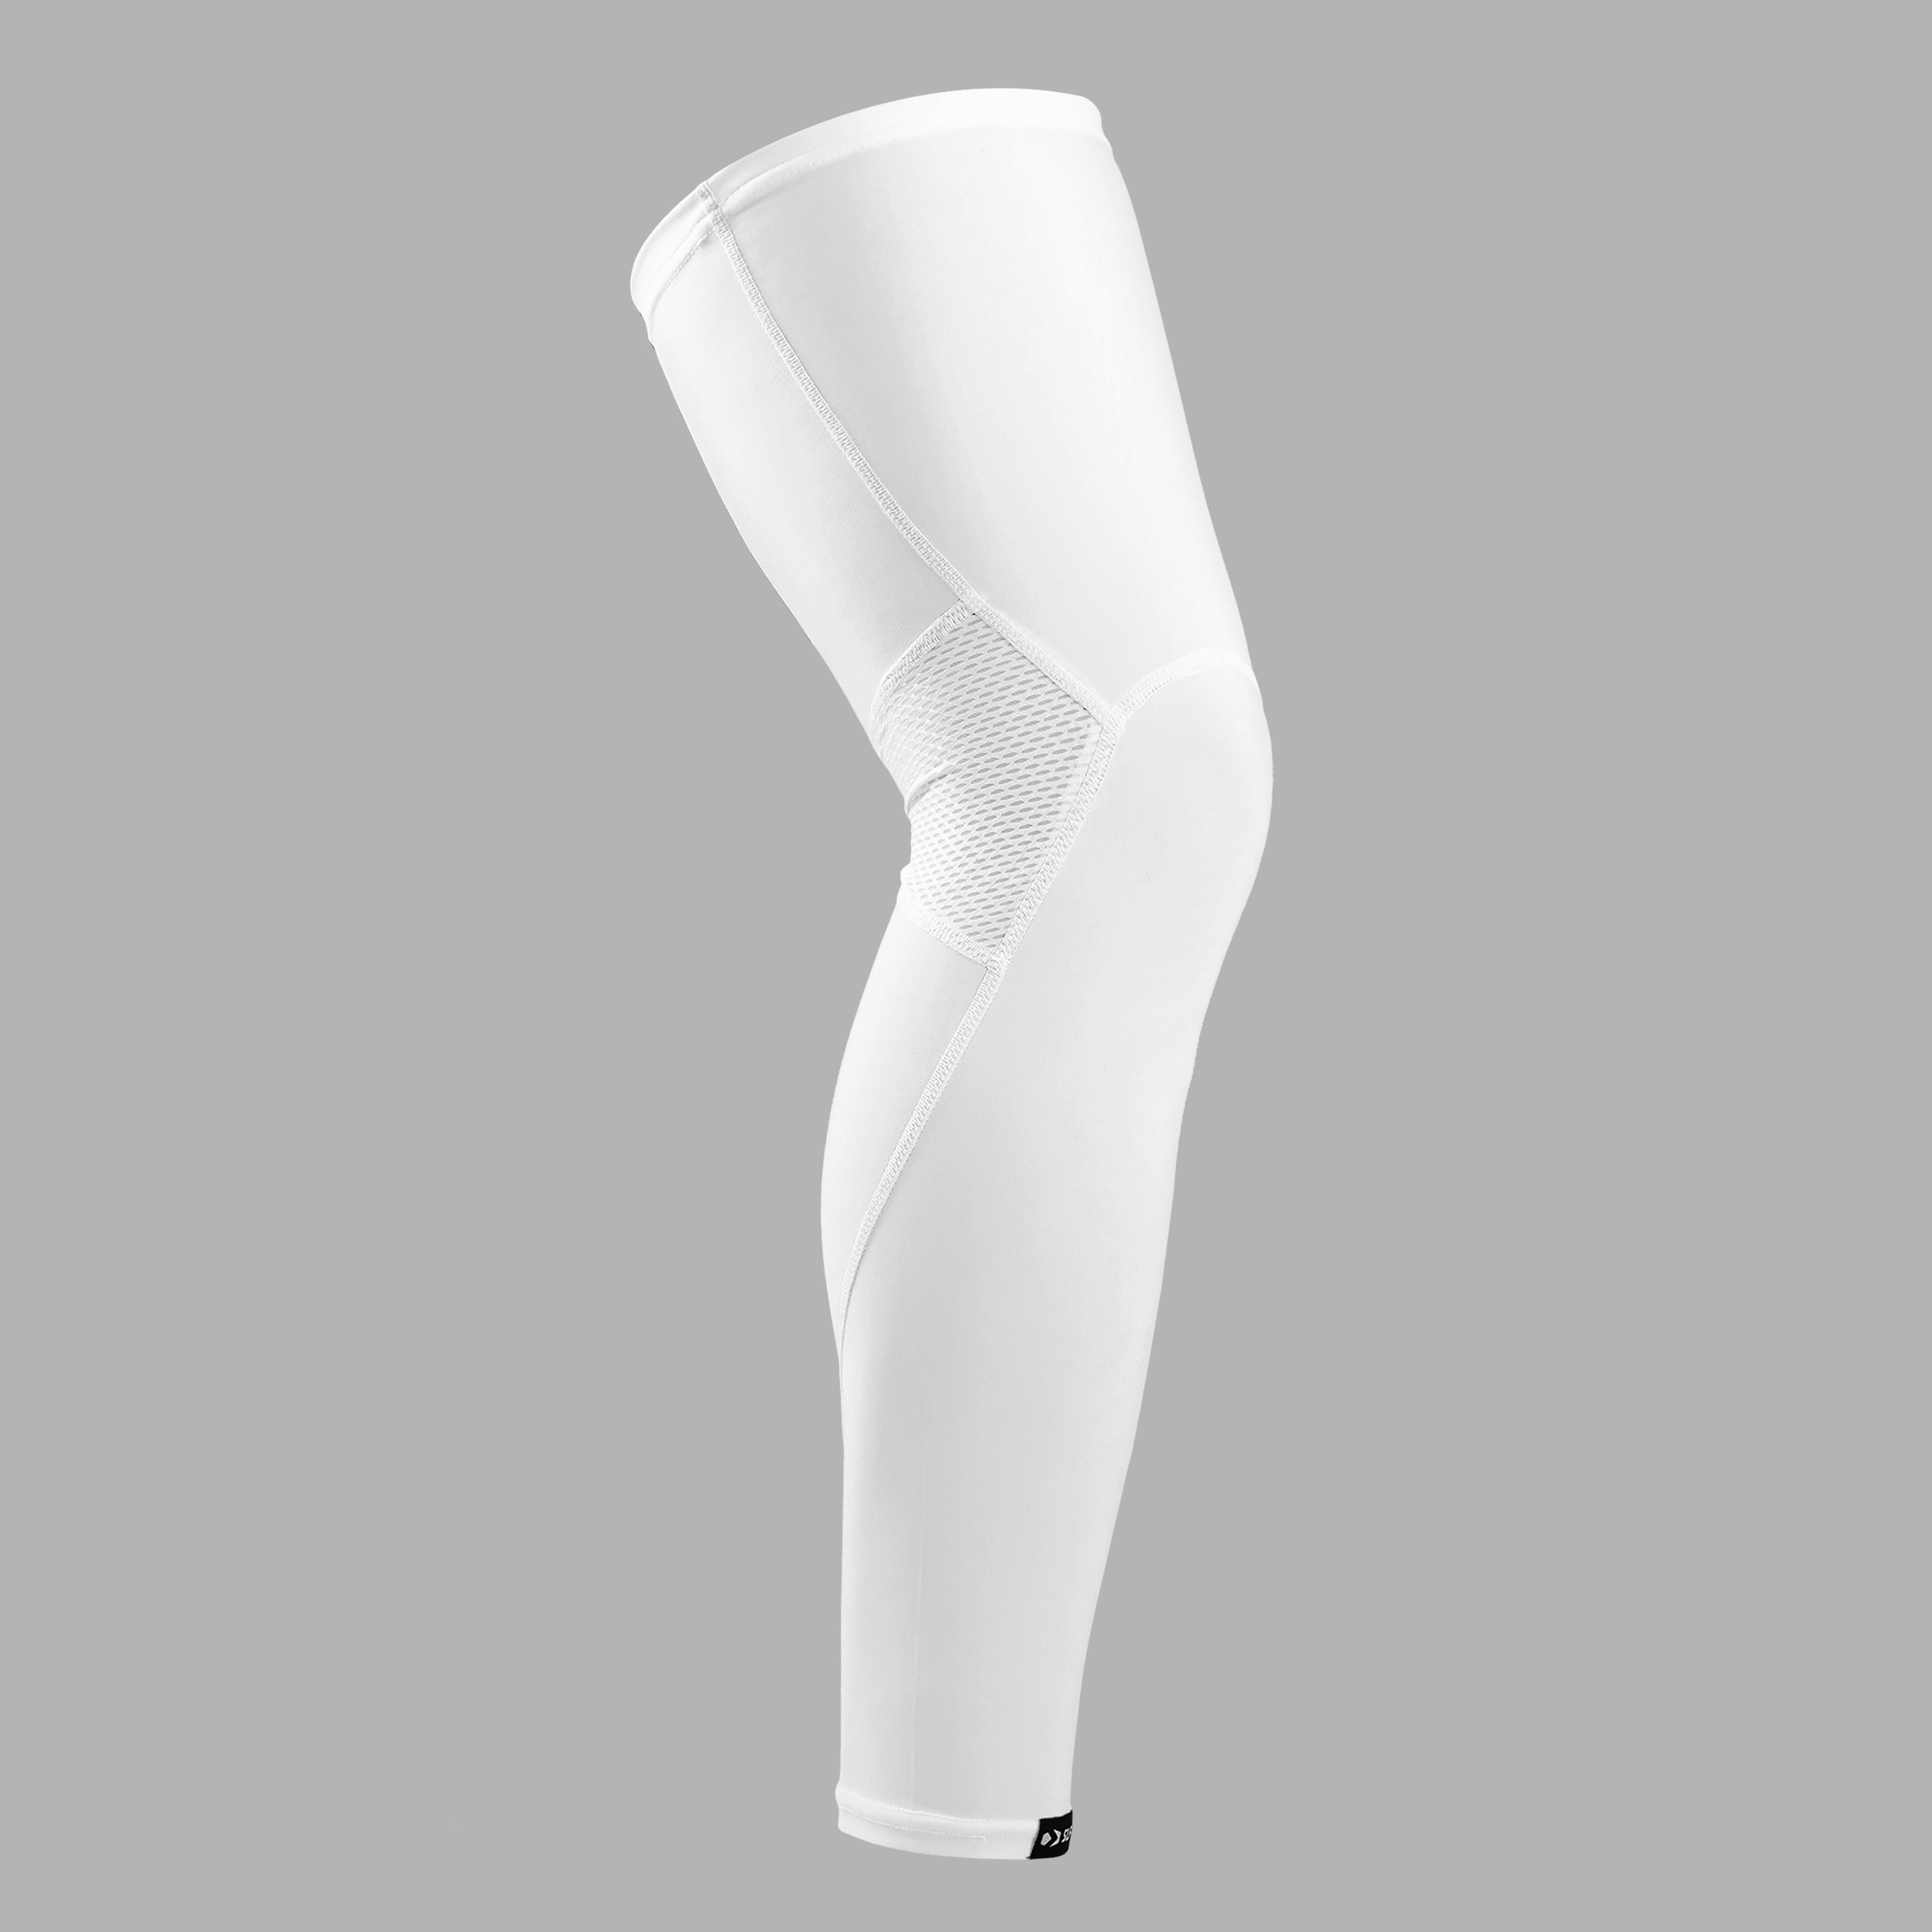 SLEEFS Football Leg Sleeves 1 Pair - Adult - White - For Adult & Youth - Calf  Compression Sleeves for Men and Boys Adults White